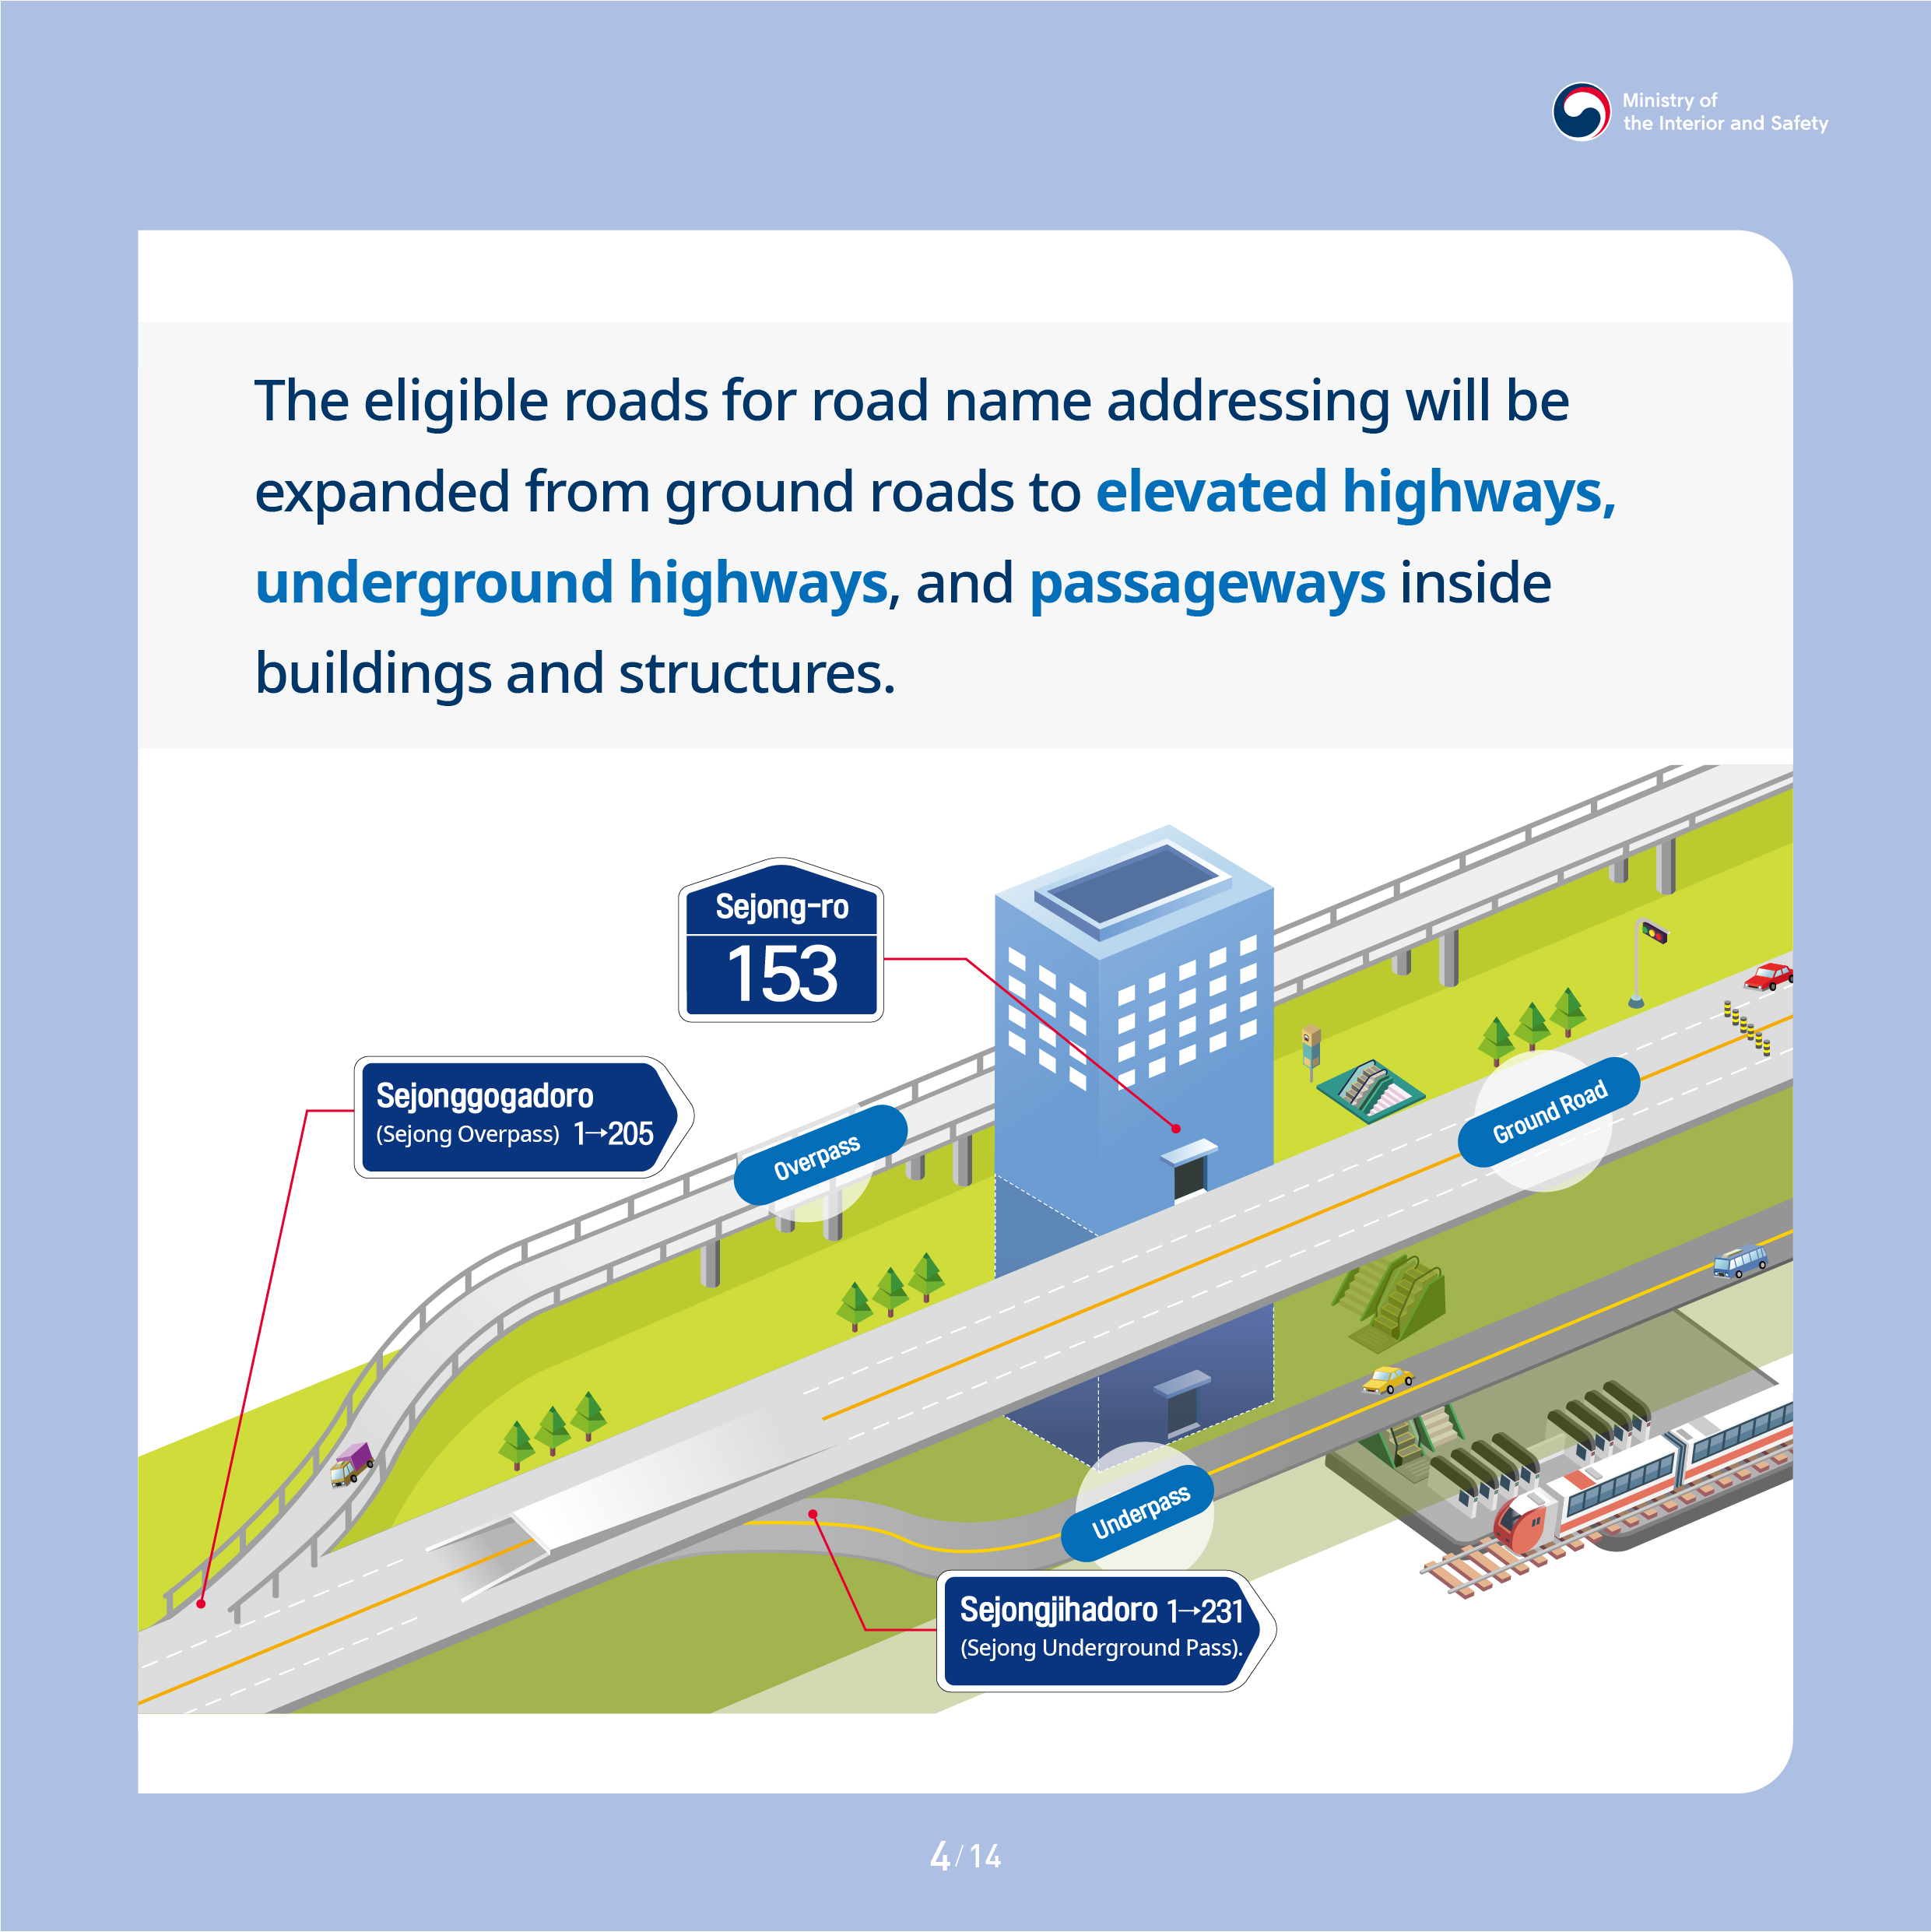 The eligible roads for road name addressing will be expanded from ground roads to elevated highways, underground highways, and passageways inside buildings and structures.